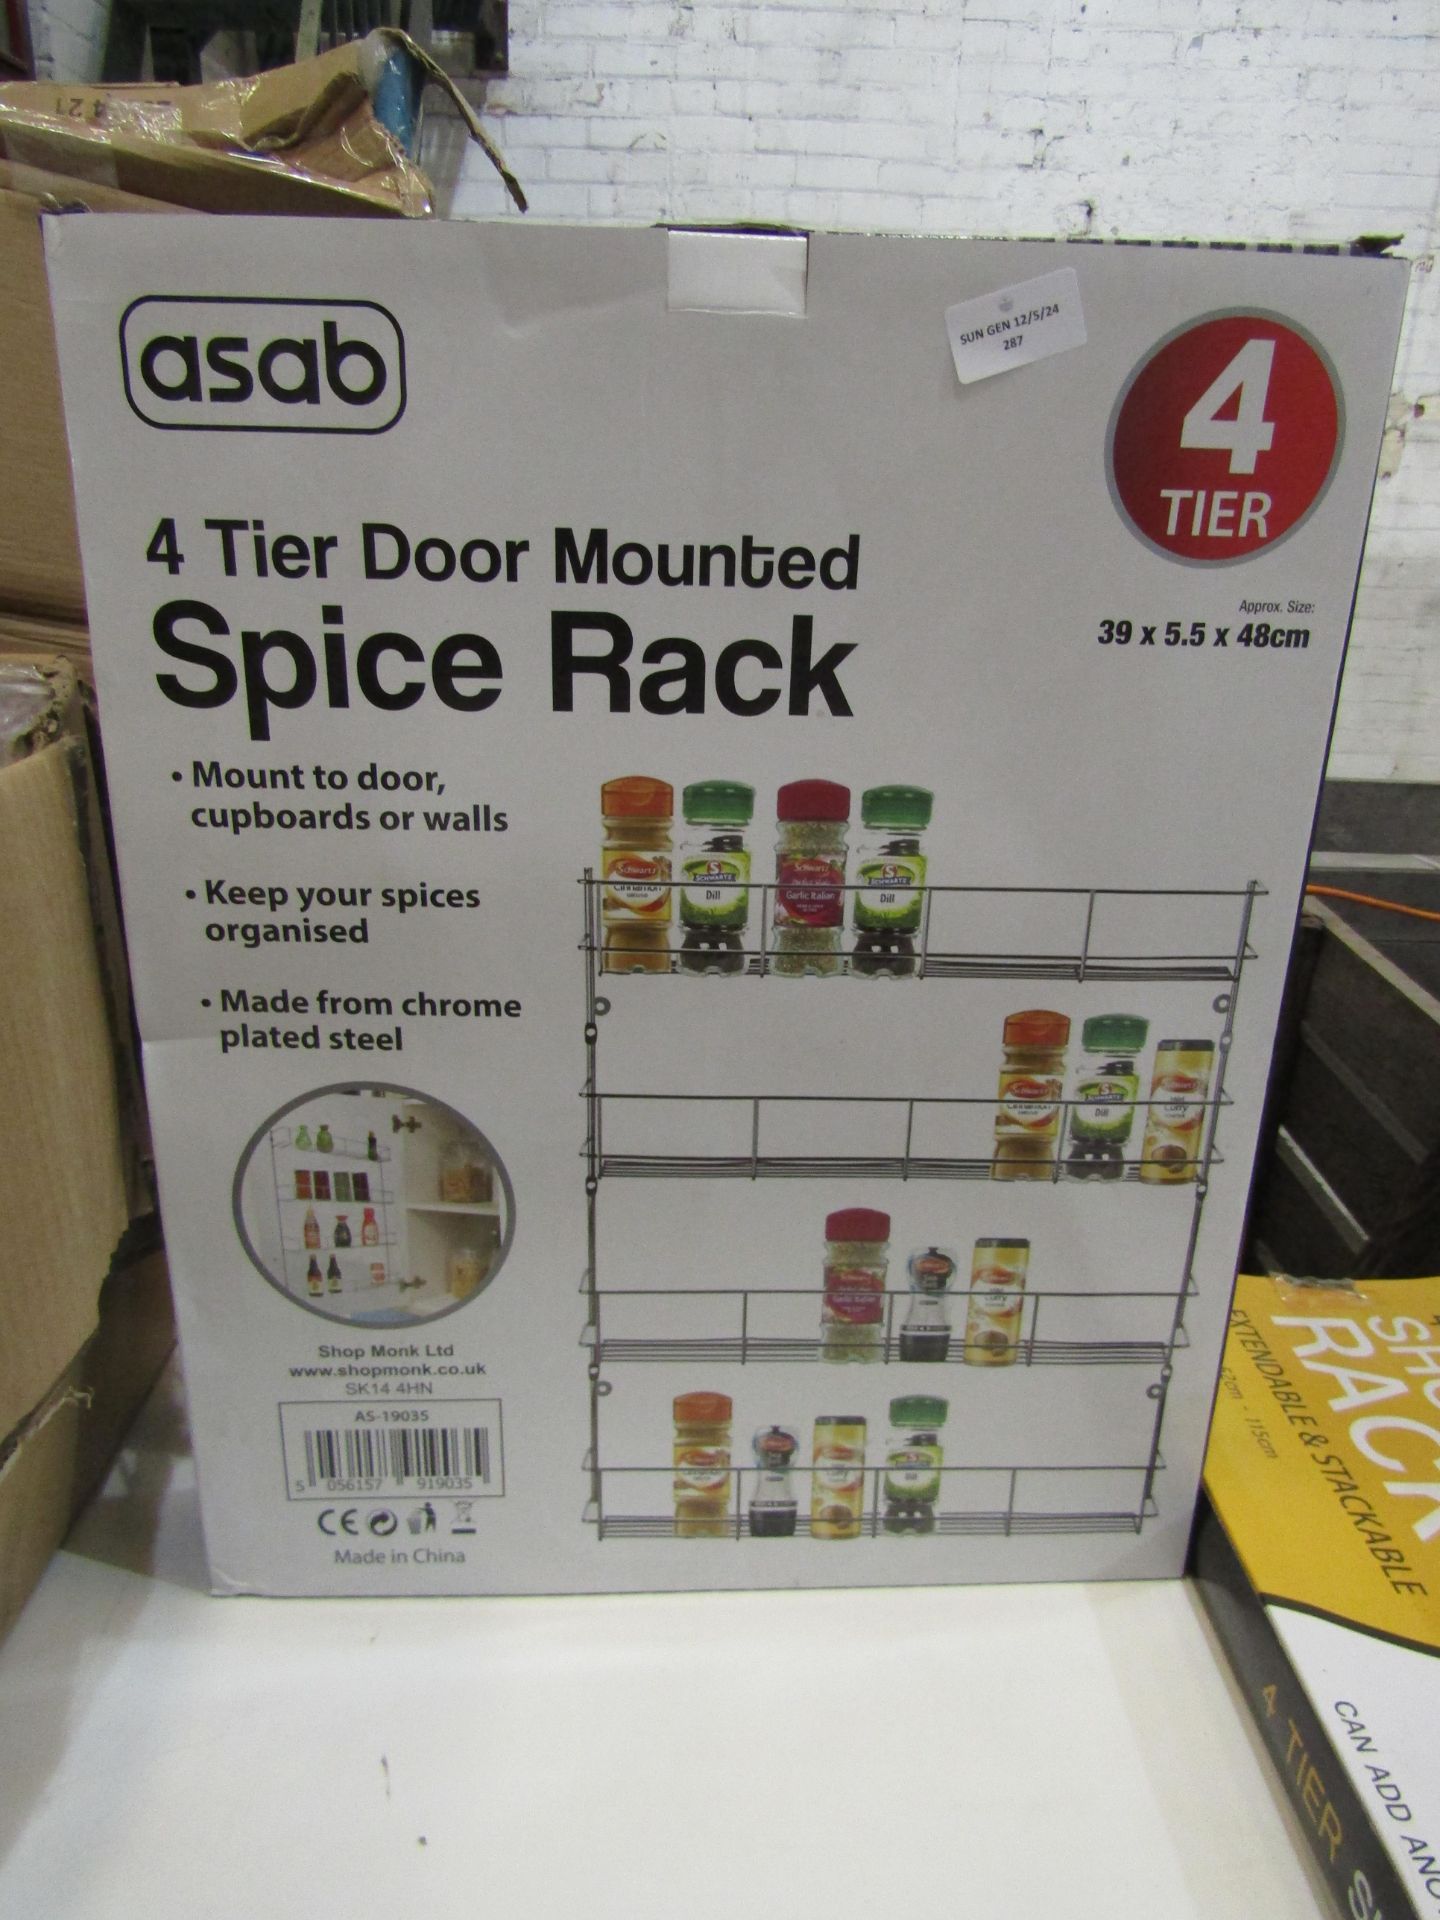 2x Asab 4 Tier Chrome Plated Steel Spice Rack, Unchecked & Boxed.